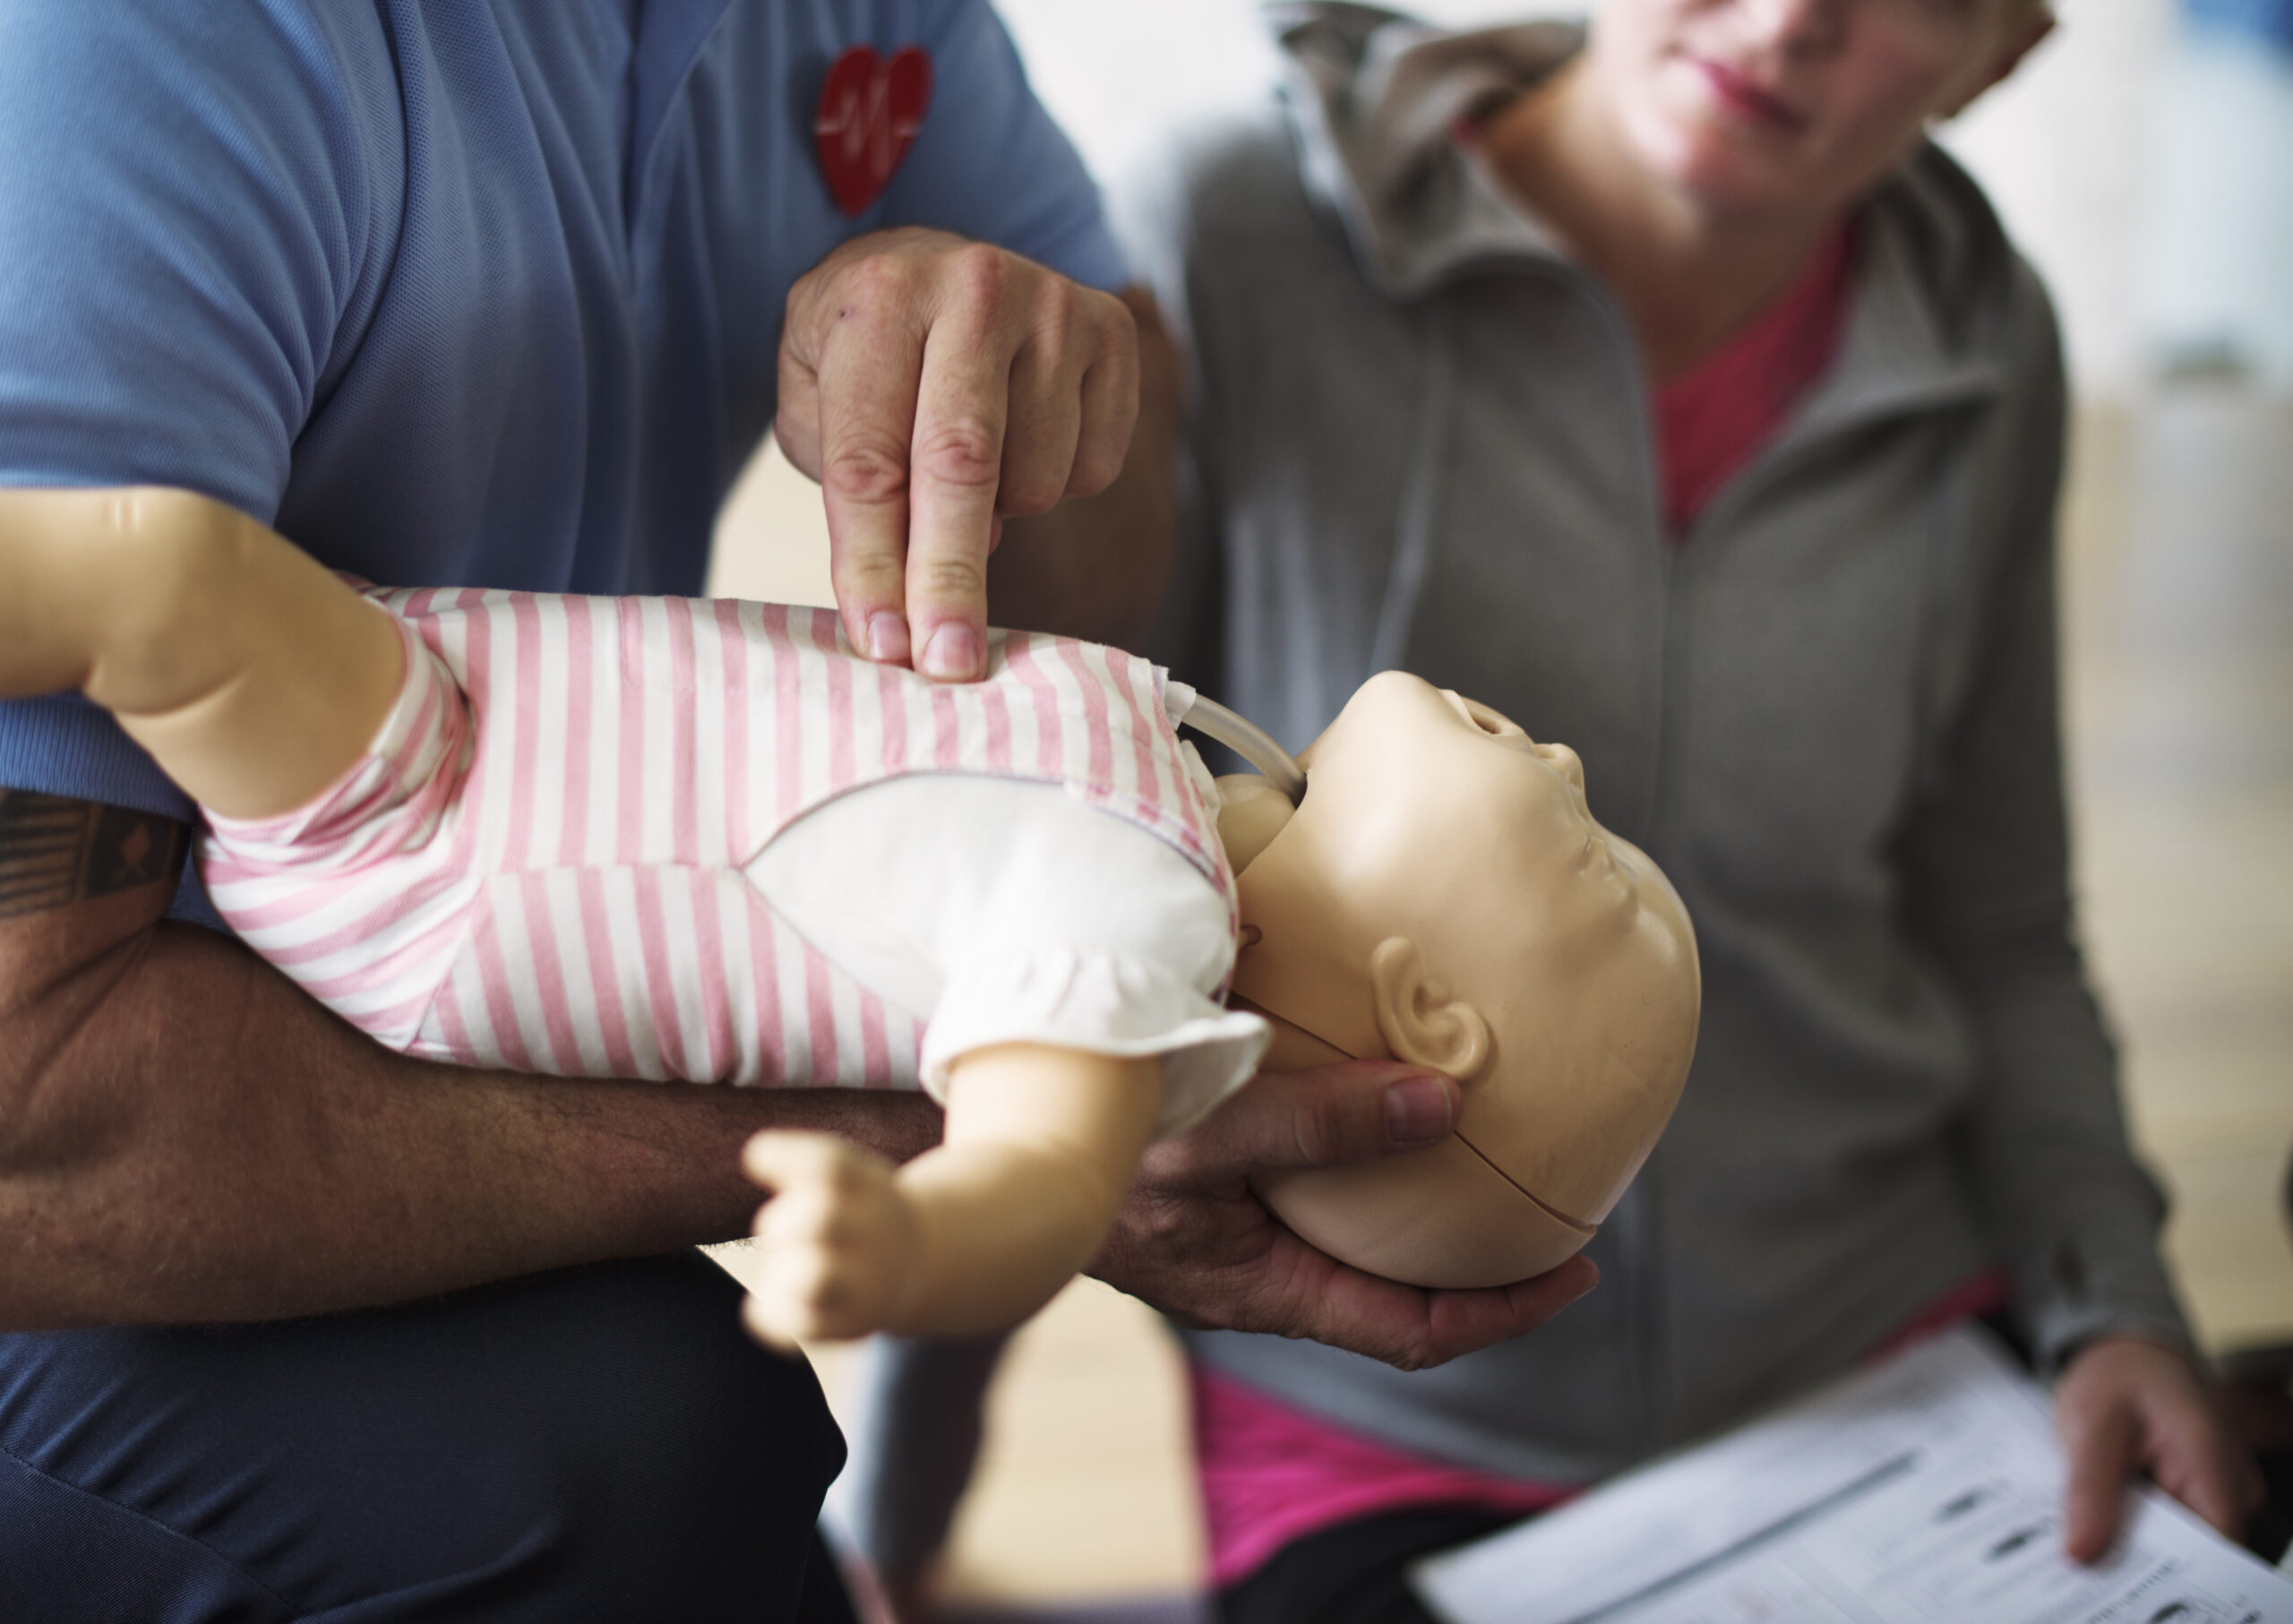 cpr first aid training on a doll infant 2022 12 16 00 51 24 utc scaled